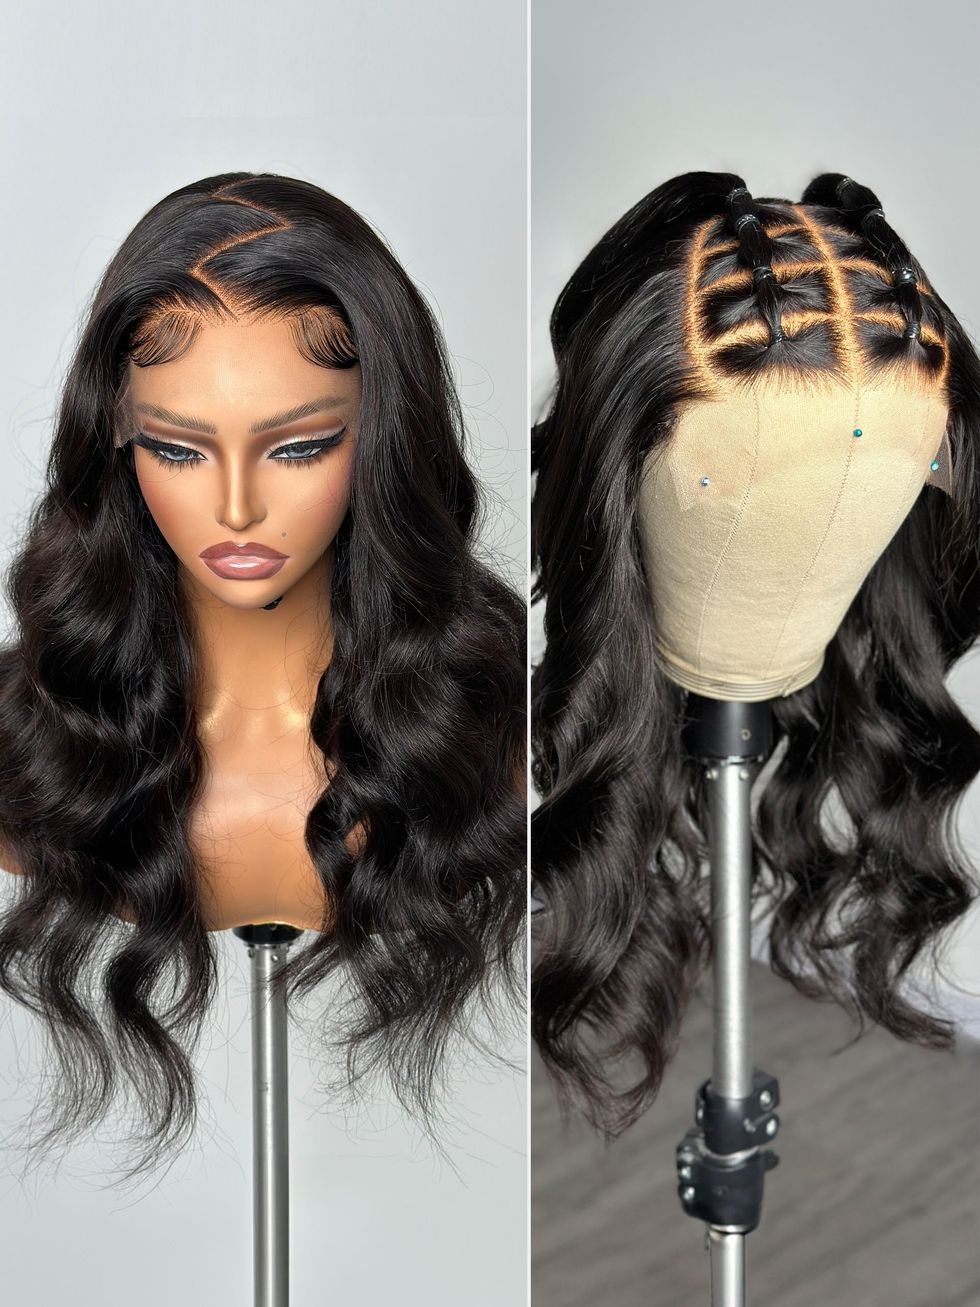 Luxury Long Wig Series,hair Mannequin Head Display Wig Mannequin Head  Wigs,synthetic Straight Wavy Curly Wig Model,girl Women Wig Dress Form 